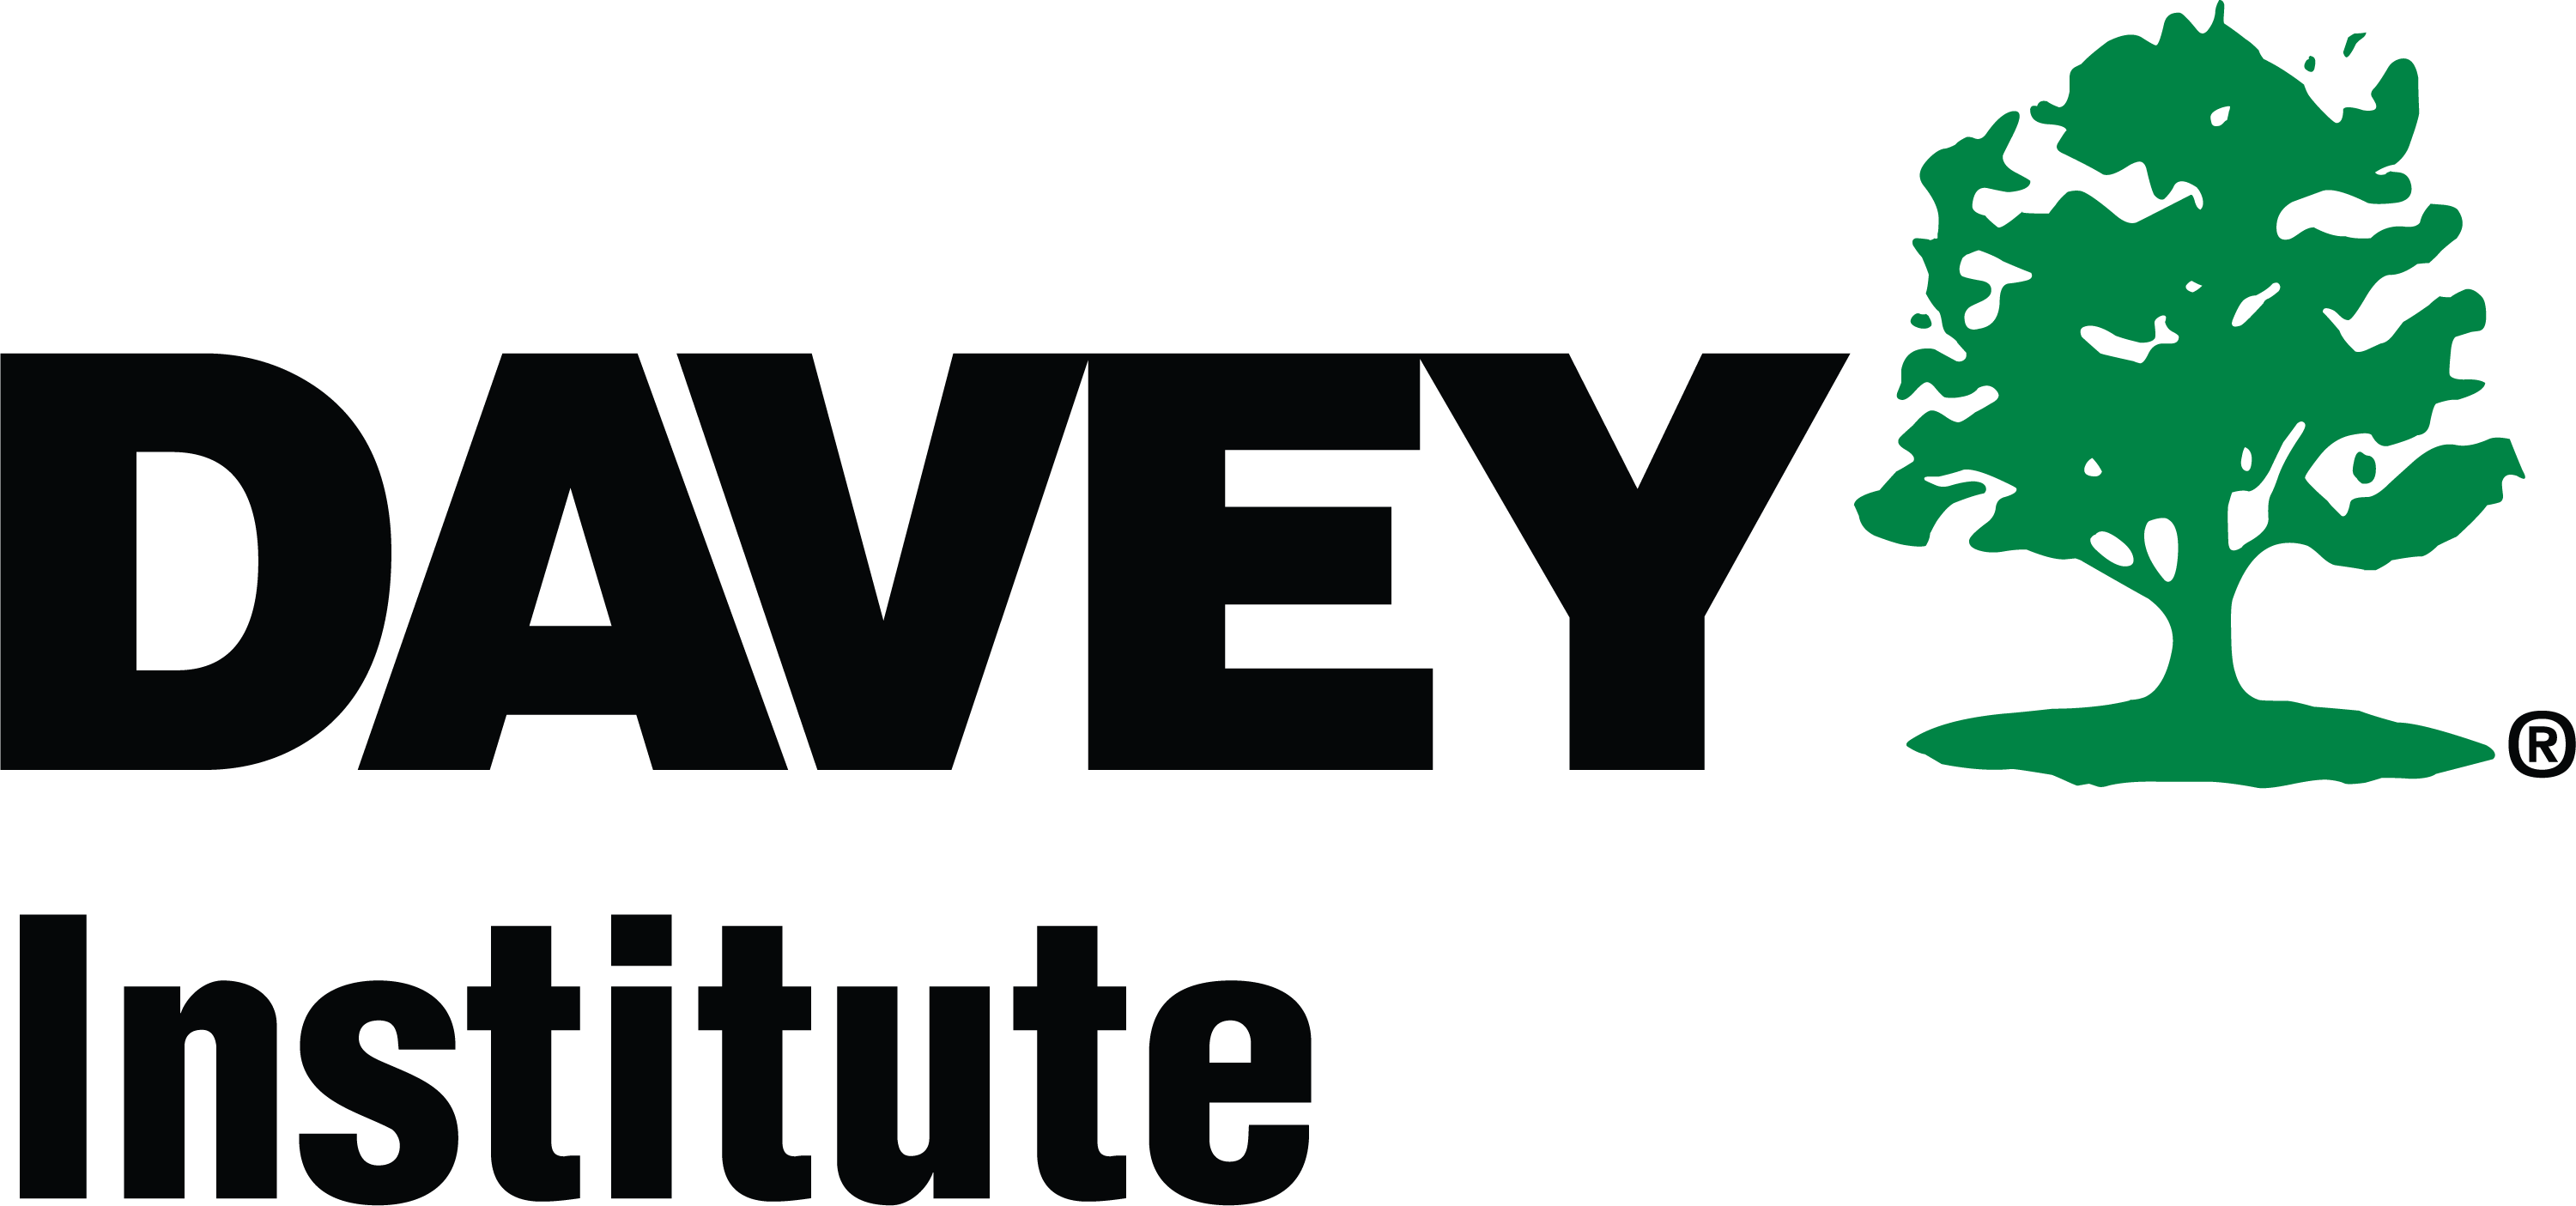 Powered by The Davey Institute